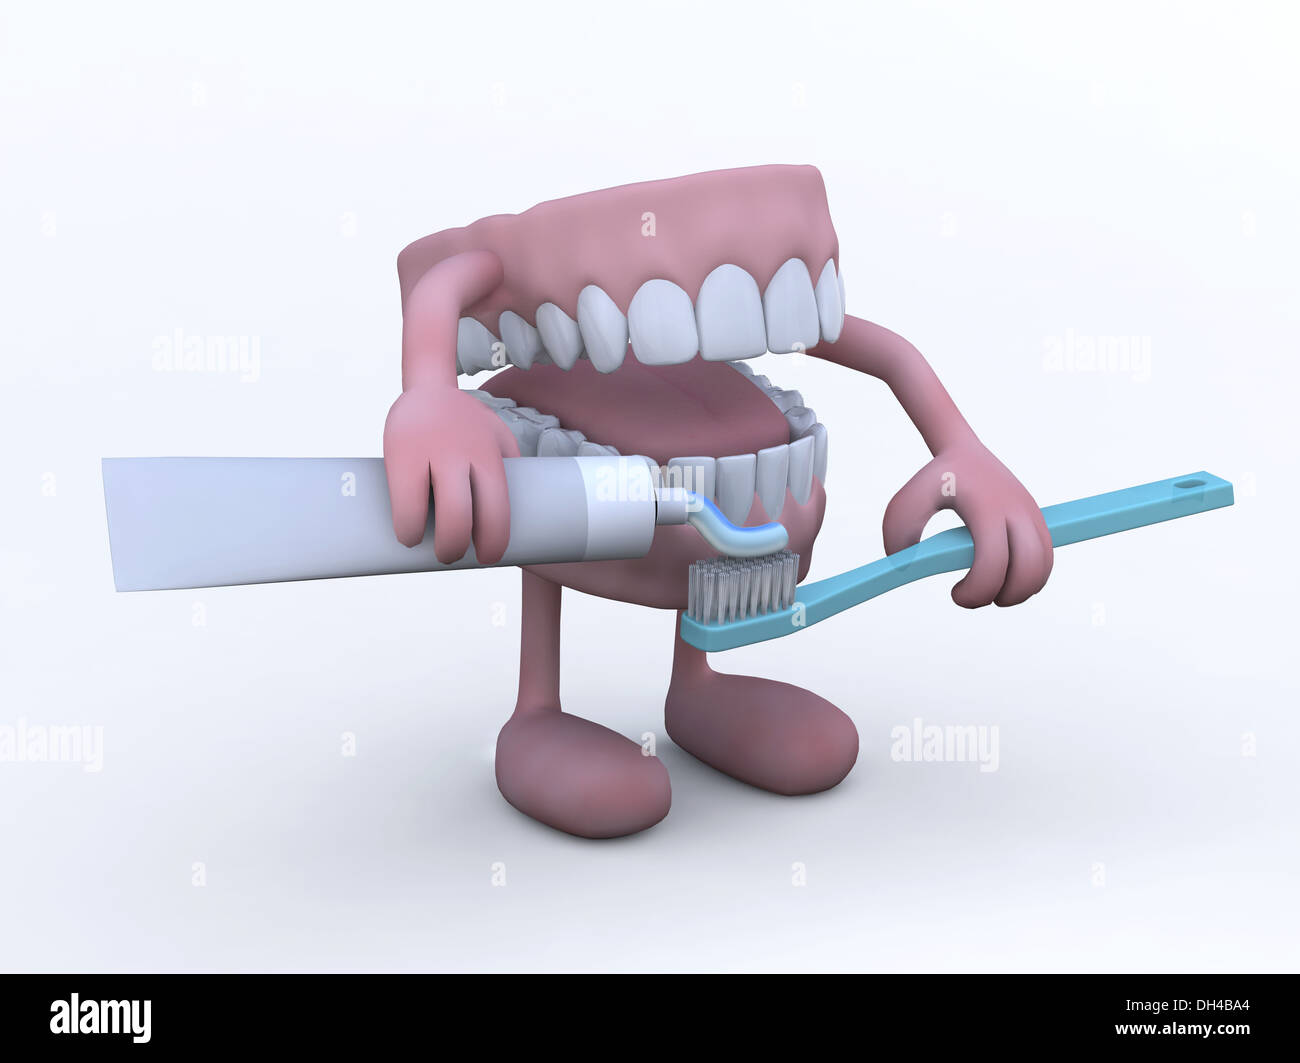 open denture with arms, legs and toothpaste tube and toothbrush, 3d illustration Stock Photo